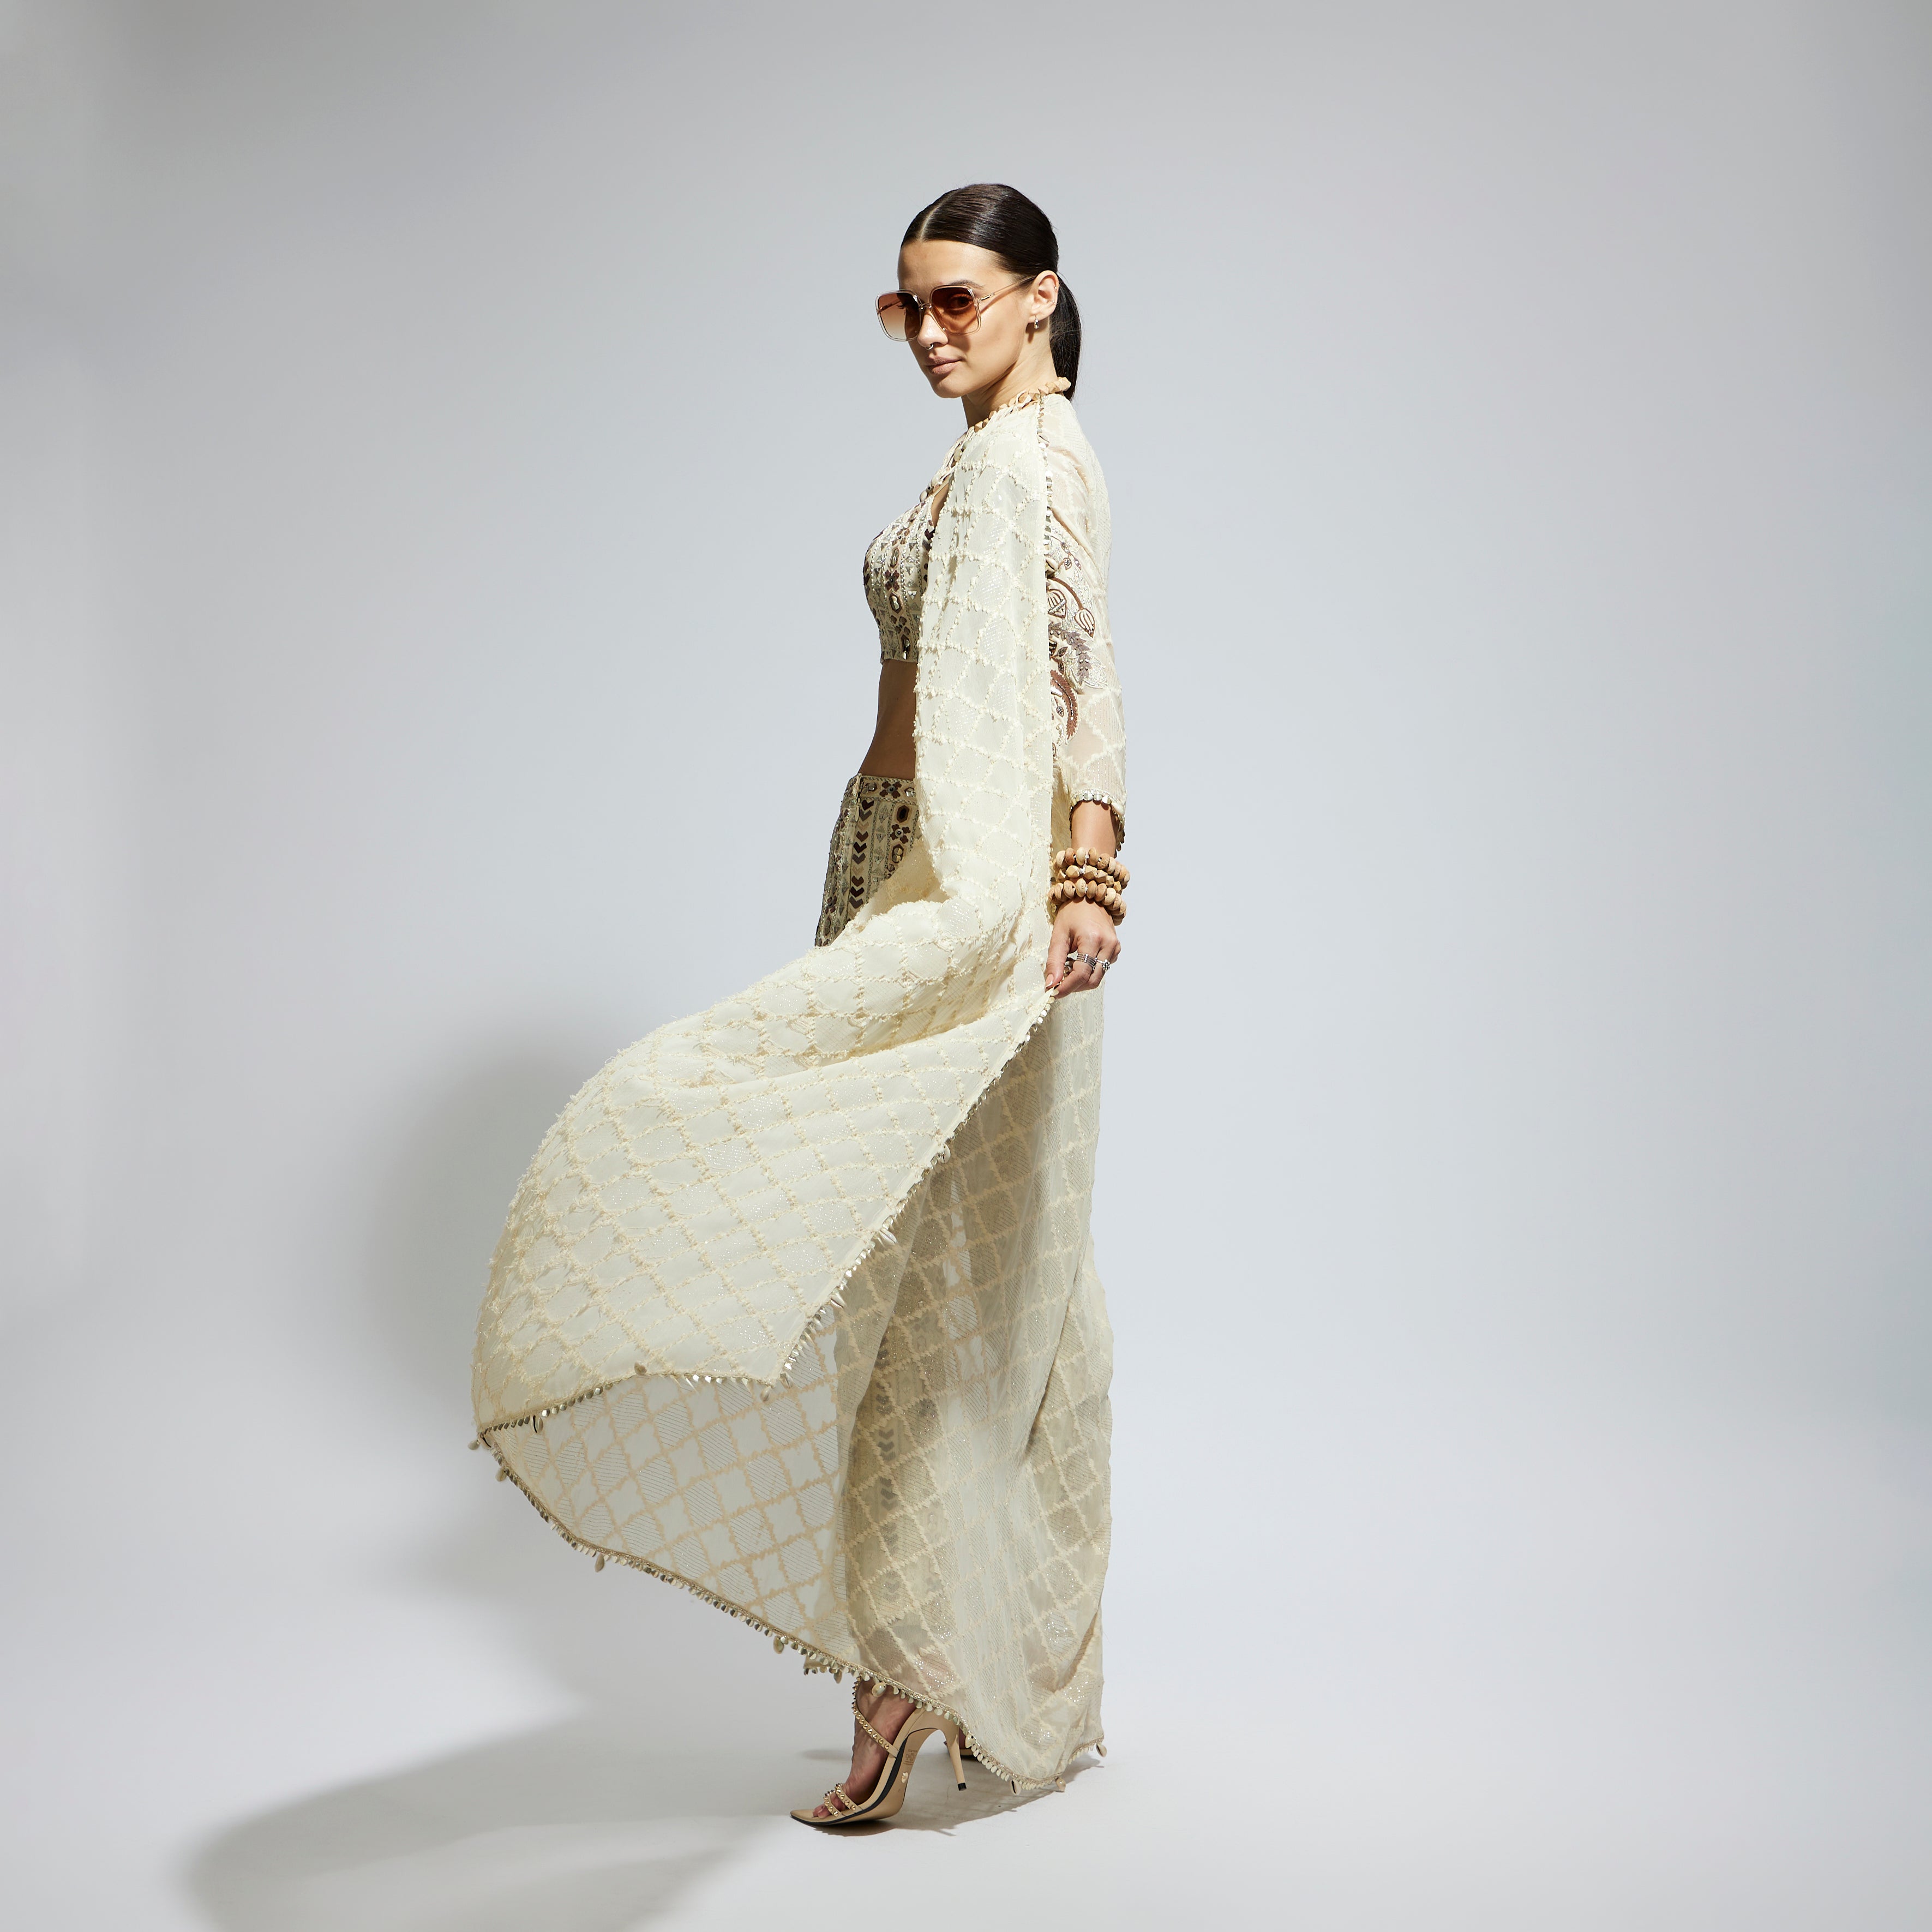 SAMSARA: IVORY AZTEC EMBELLISHED CAPE PAIRED WITH HEAVILY EMBELLISHED BUSTIER AND PANTS